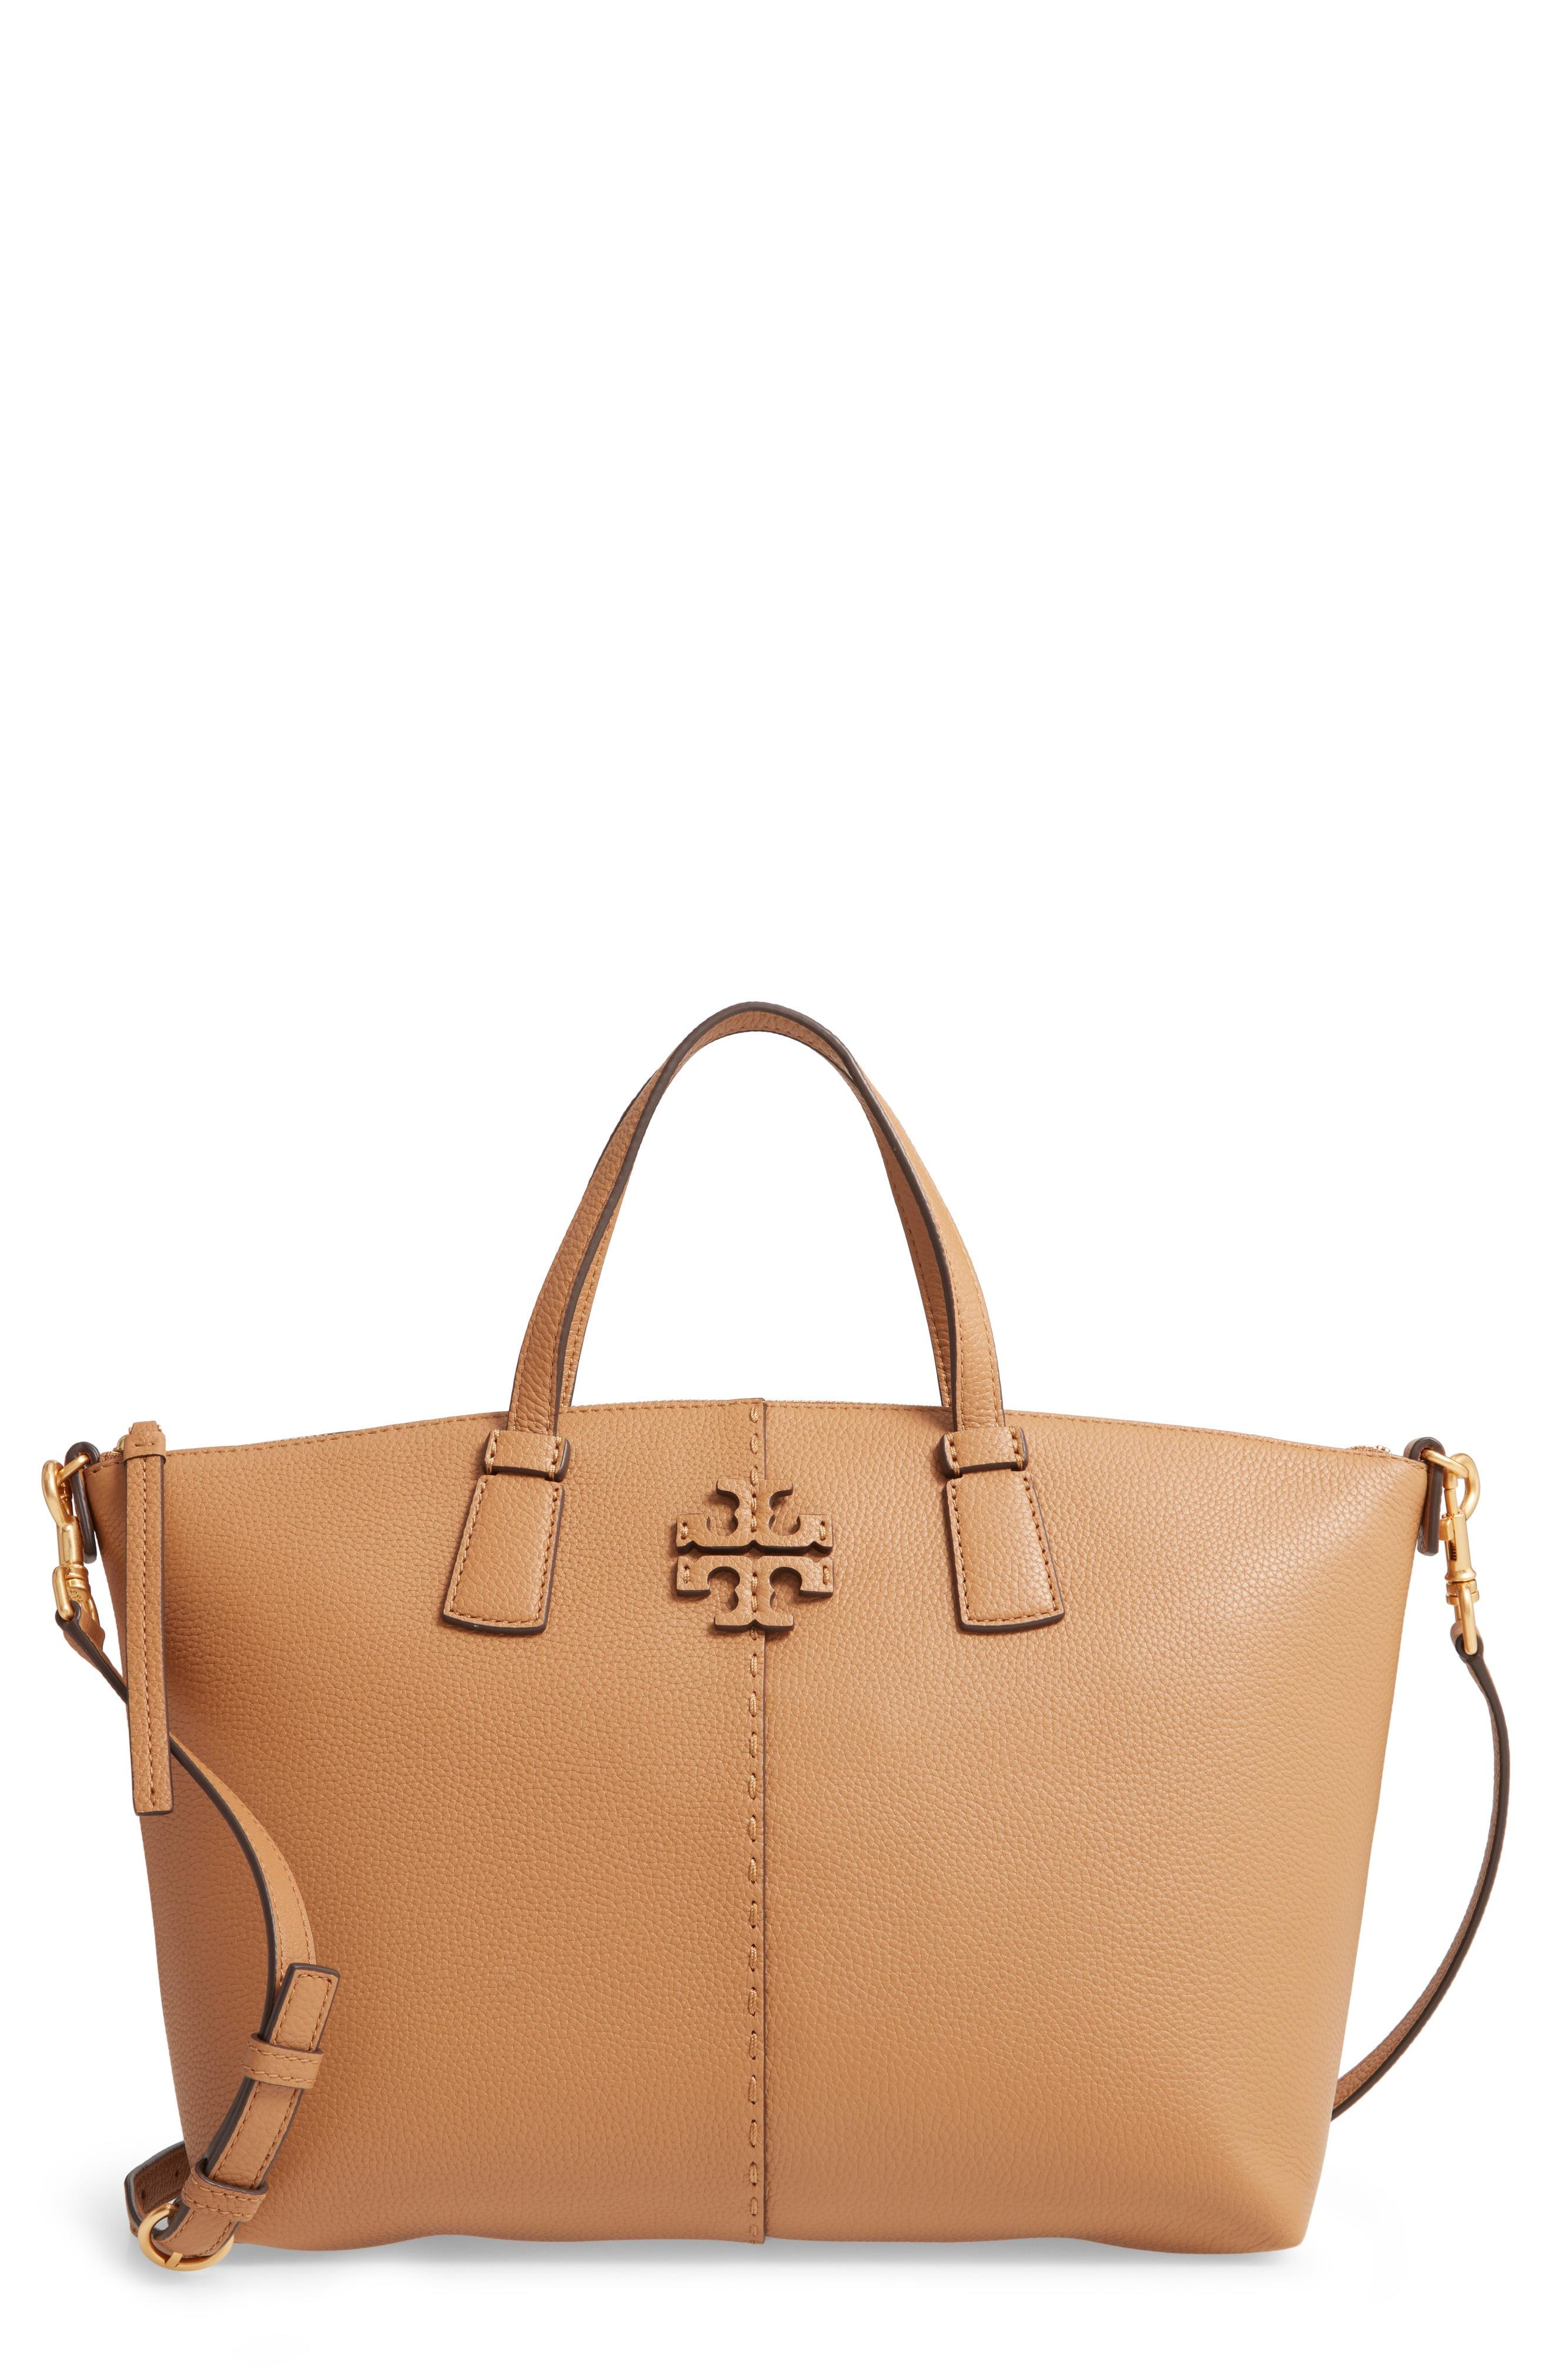 Tory Burch Mcgraw Leather Satchel in Claret/Gold (Black) | Lyst